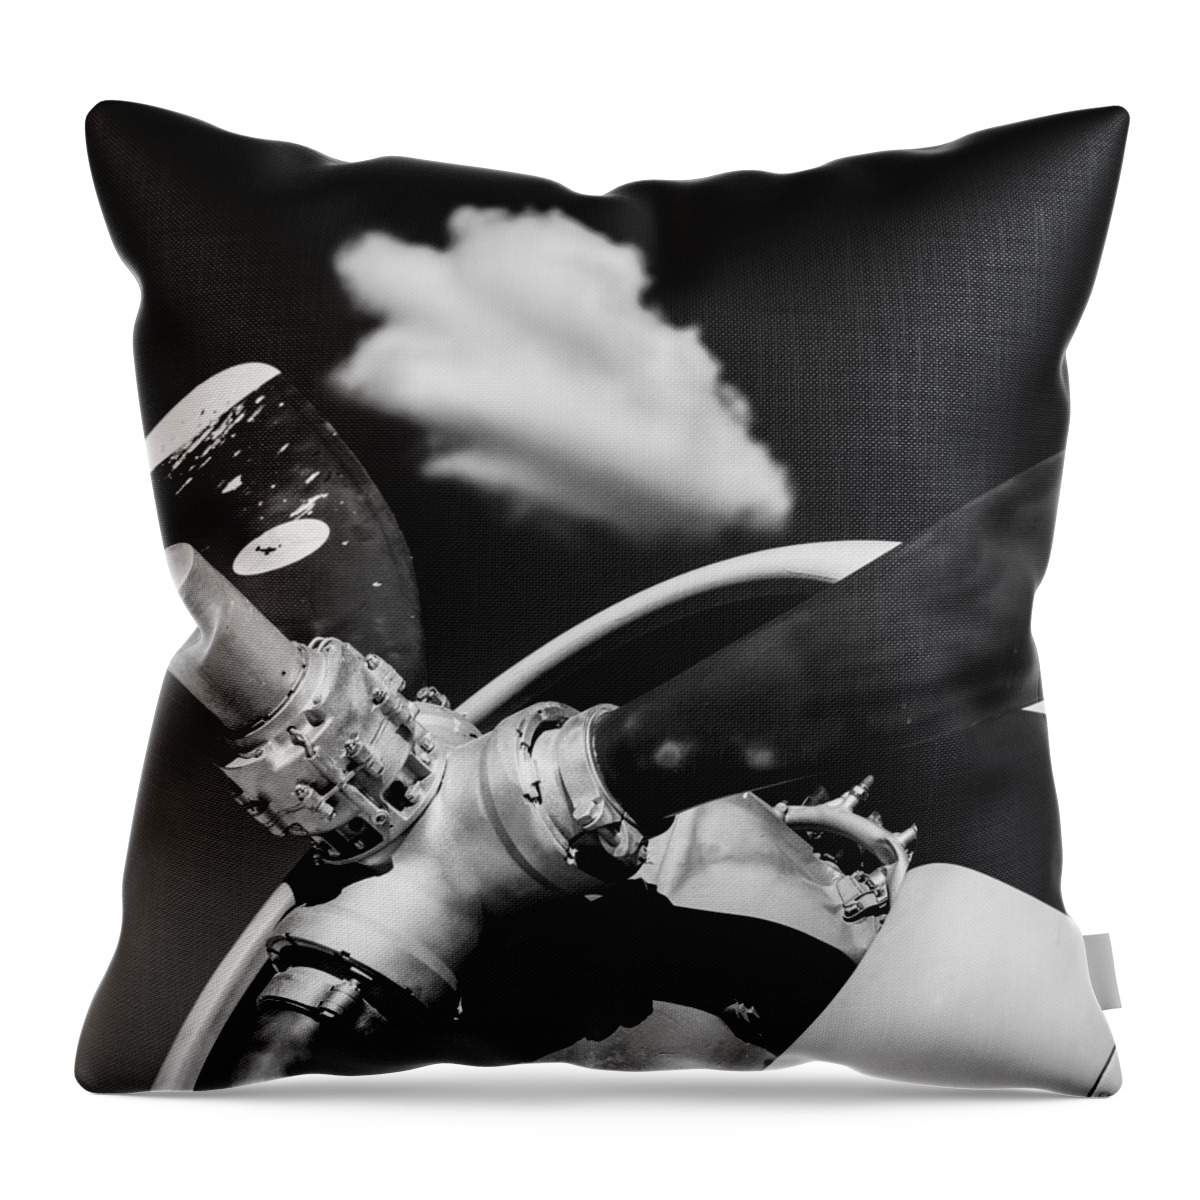 Plane Throw Pillow featuring the photograph Plane Portrait 2 by Ryan Weddle